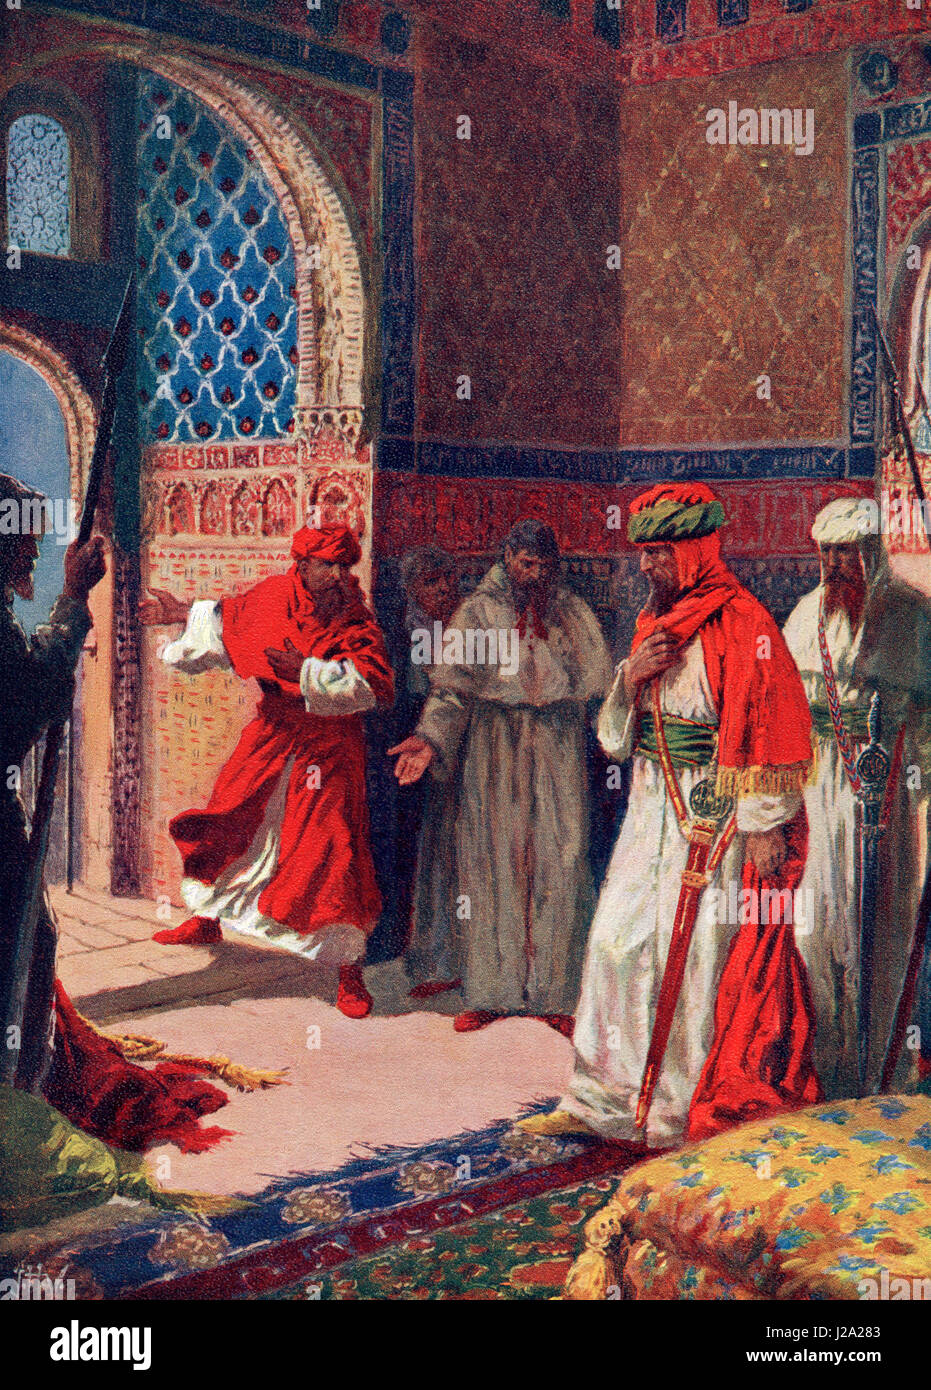 The last council of Boabdil at The Alhambra Palace, Granada, Spain in 1492.  Abu `Abdallah Muhammad XII, c. 1460 – c. 1533, aka Boabdil.  Twenty-second and last Nasrid ruler of Granada in Iberia. After the painting by J.H. Valda, (d.1941).  From Hutchinson's History of the Nations, published 1915. Stock Photo